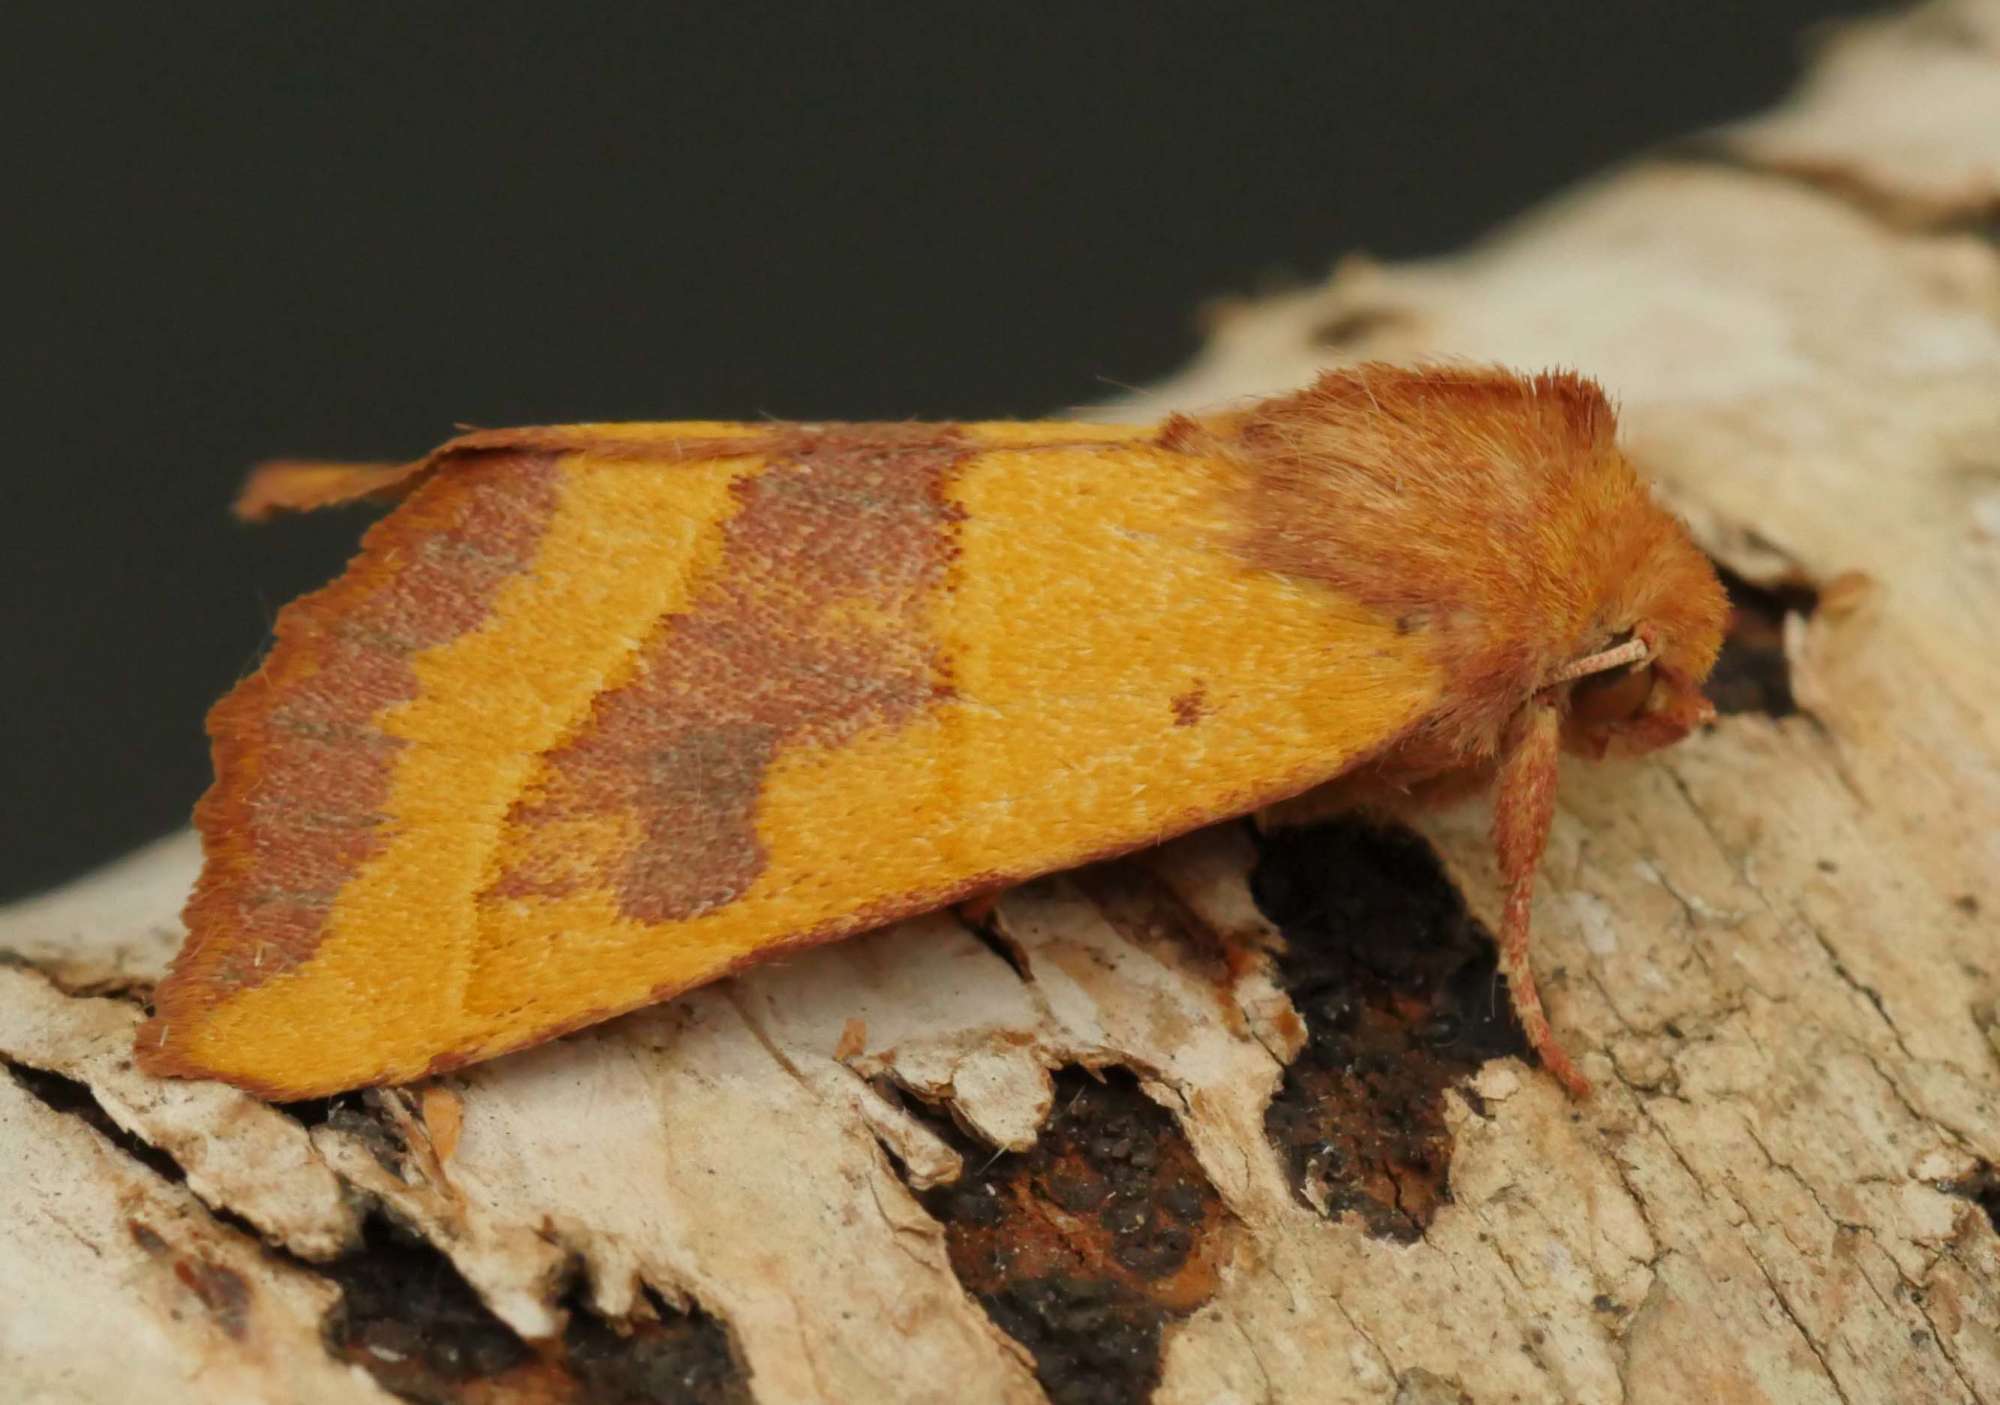 Centre-barred Sallow (Atethmia centrago) photographed in Somerset by Jenny Vickers